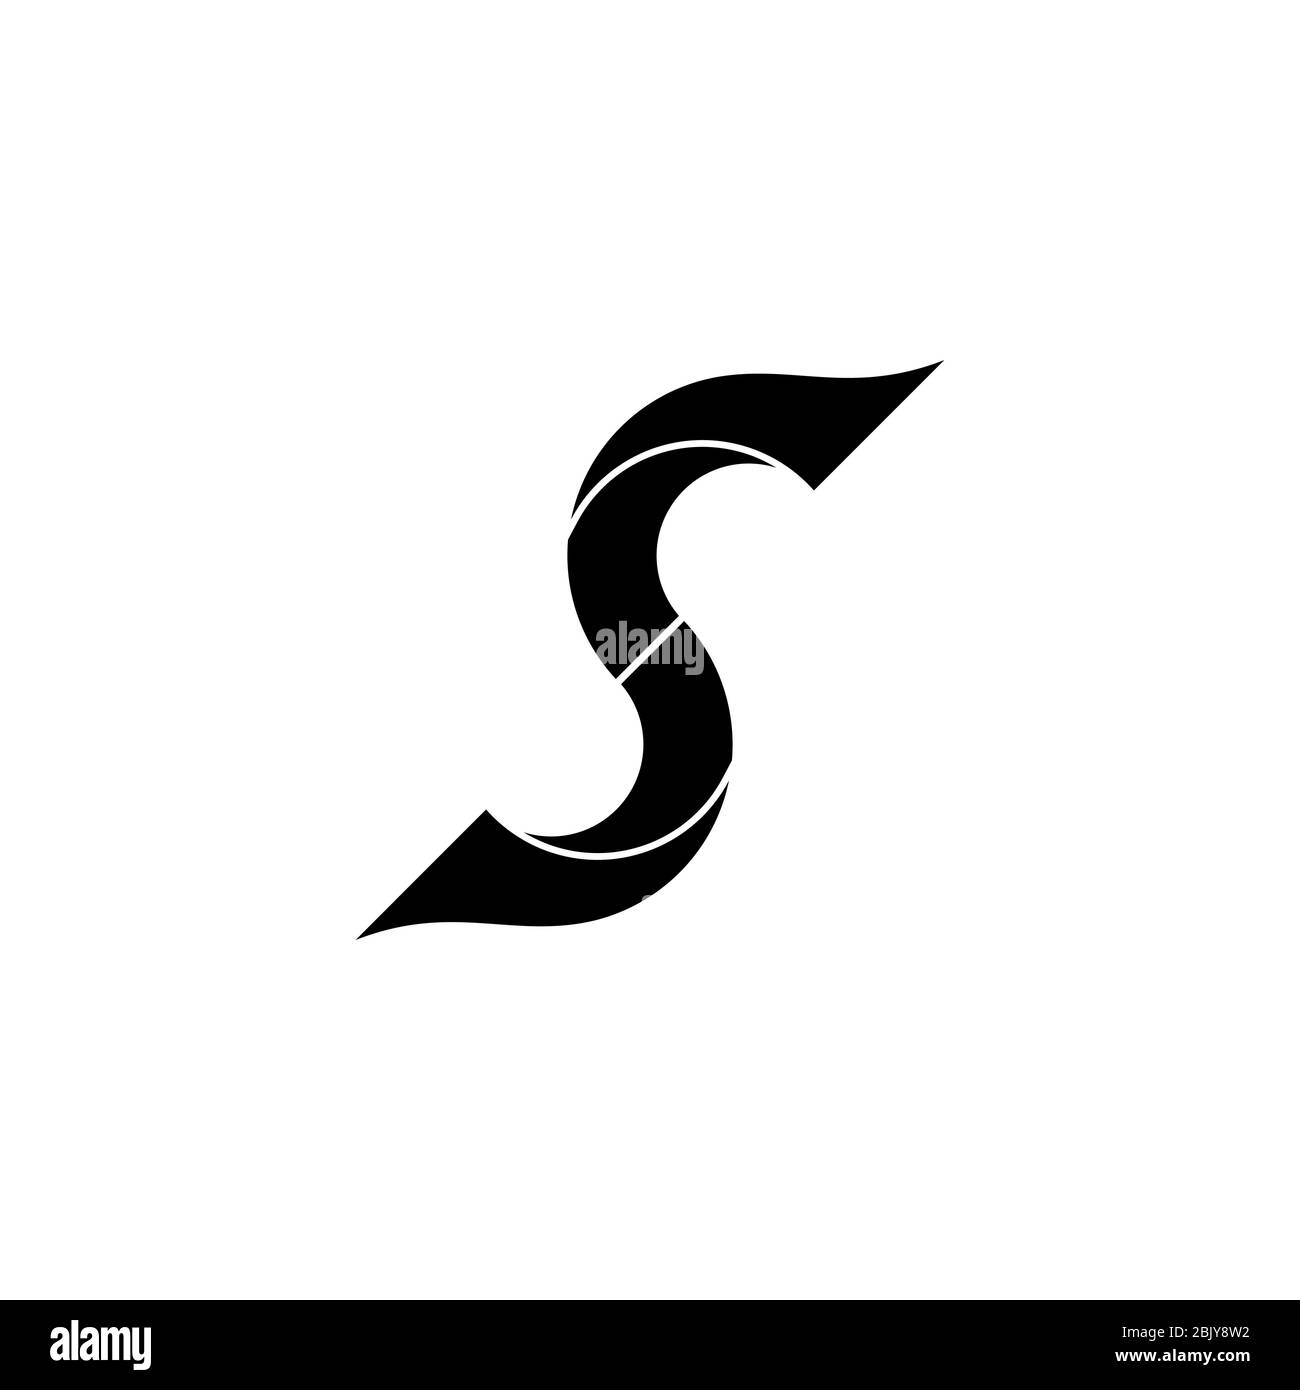 Initial letter S graphic logo design concept template, isolated on white background. Stock Vector